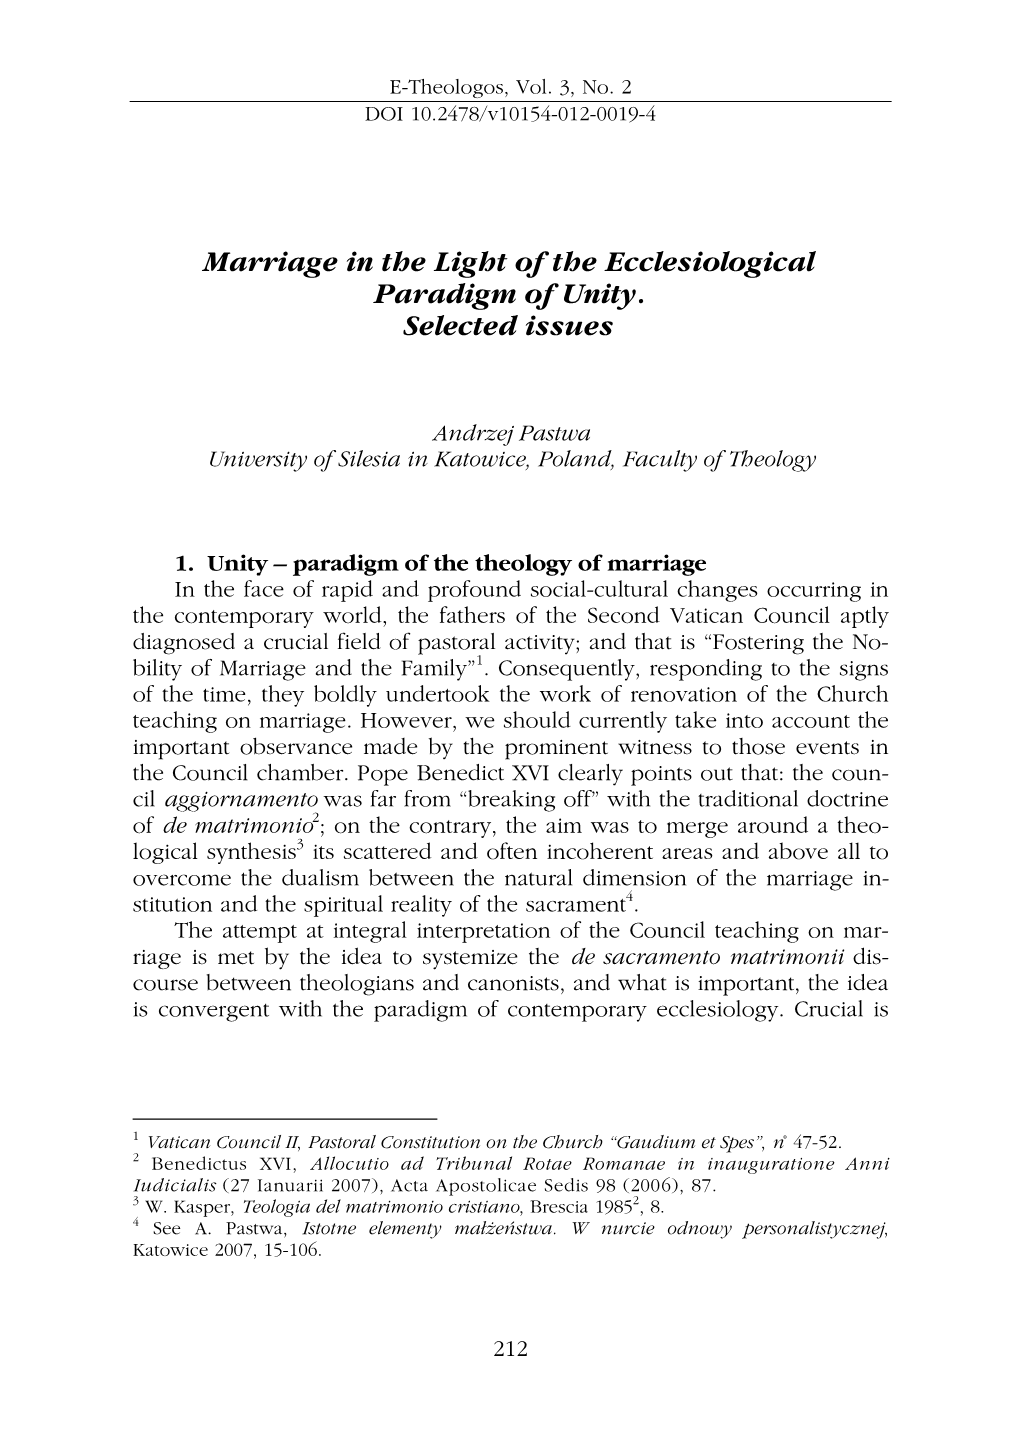 Marriage in the Light of the Ecclesiological Paradigm of Unity. Selected Issues